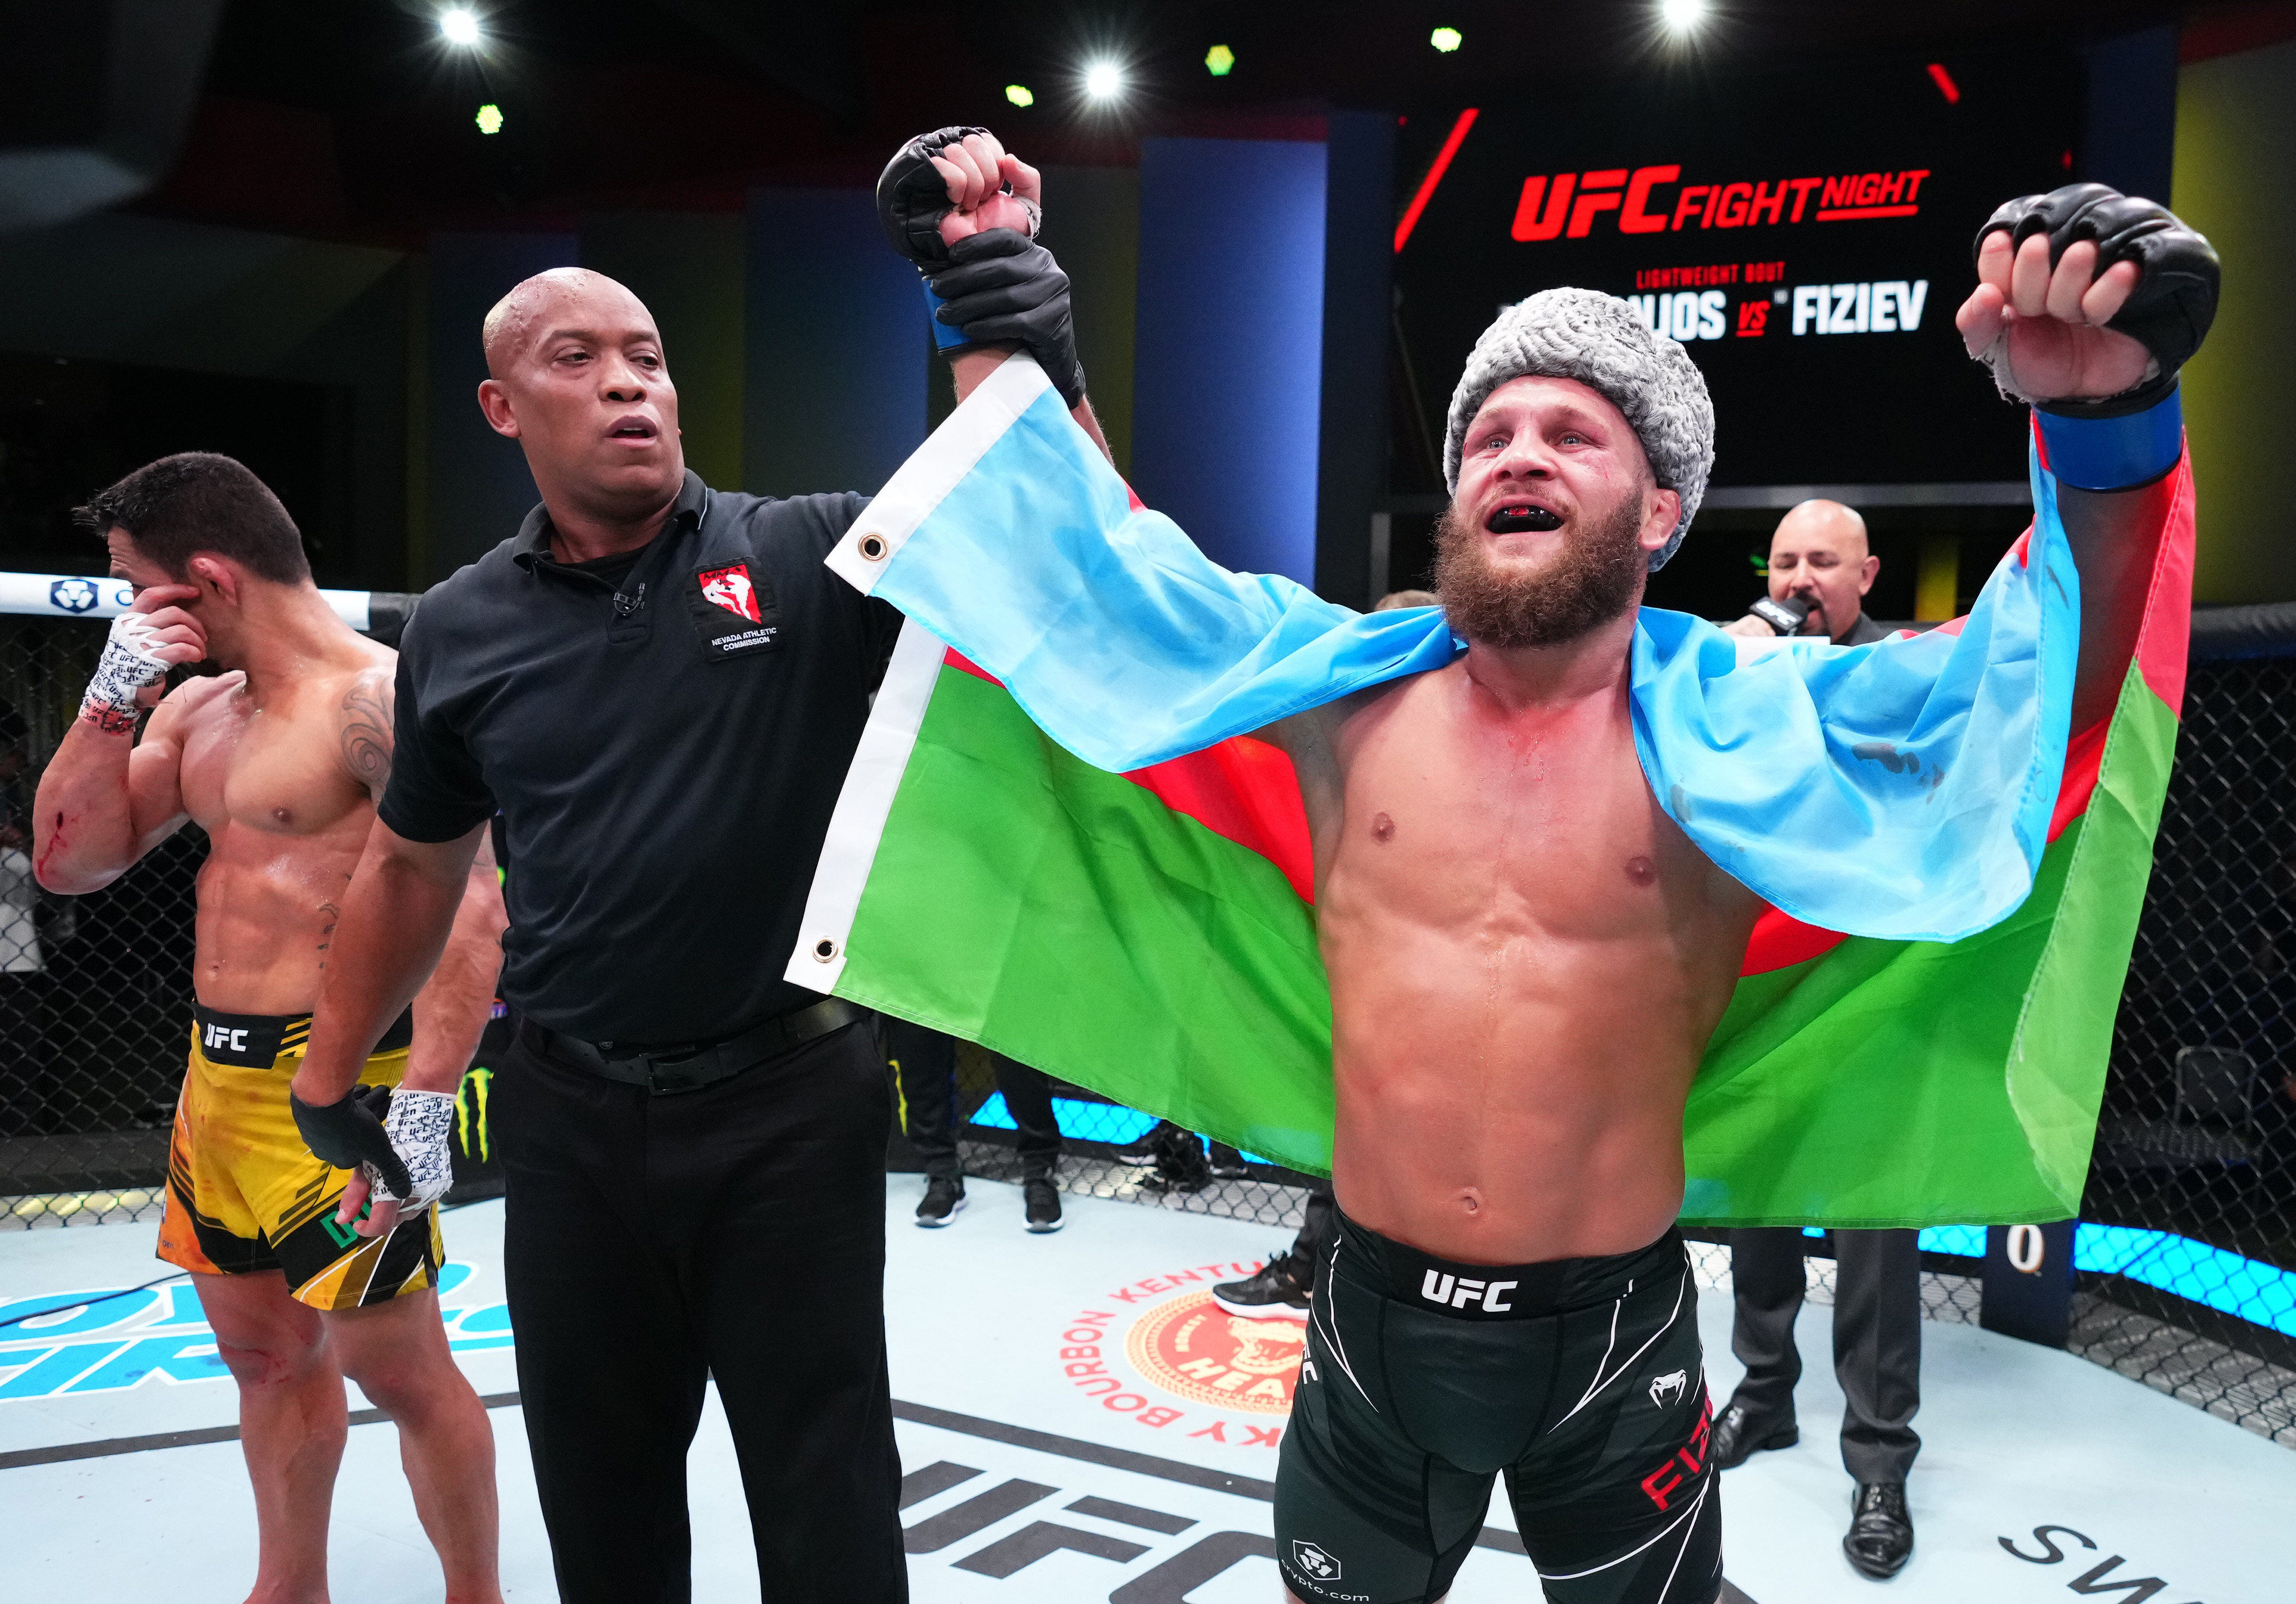 Rafael Fiziev celebrates after his knockout victory over Rafael Dos Anjos. Photo: Zuffa LLC